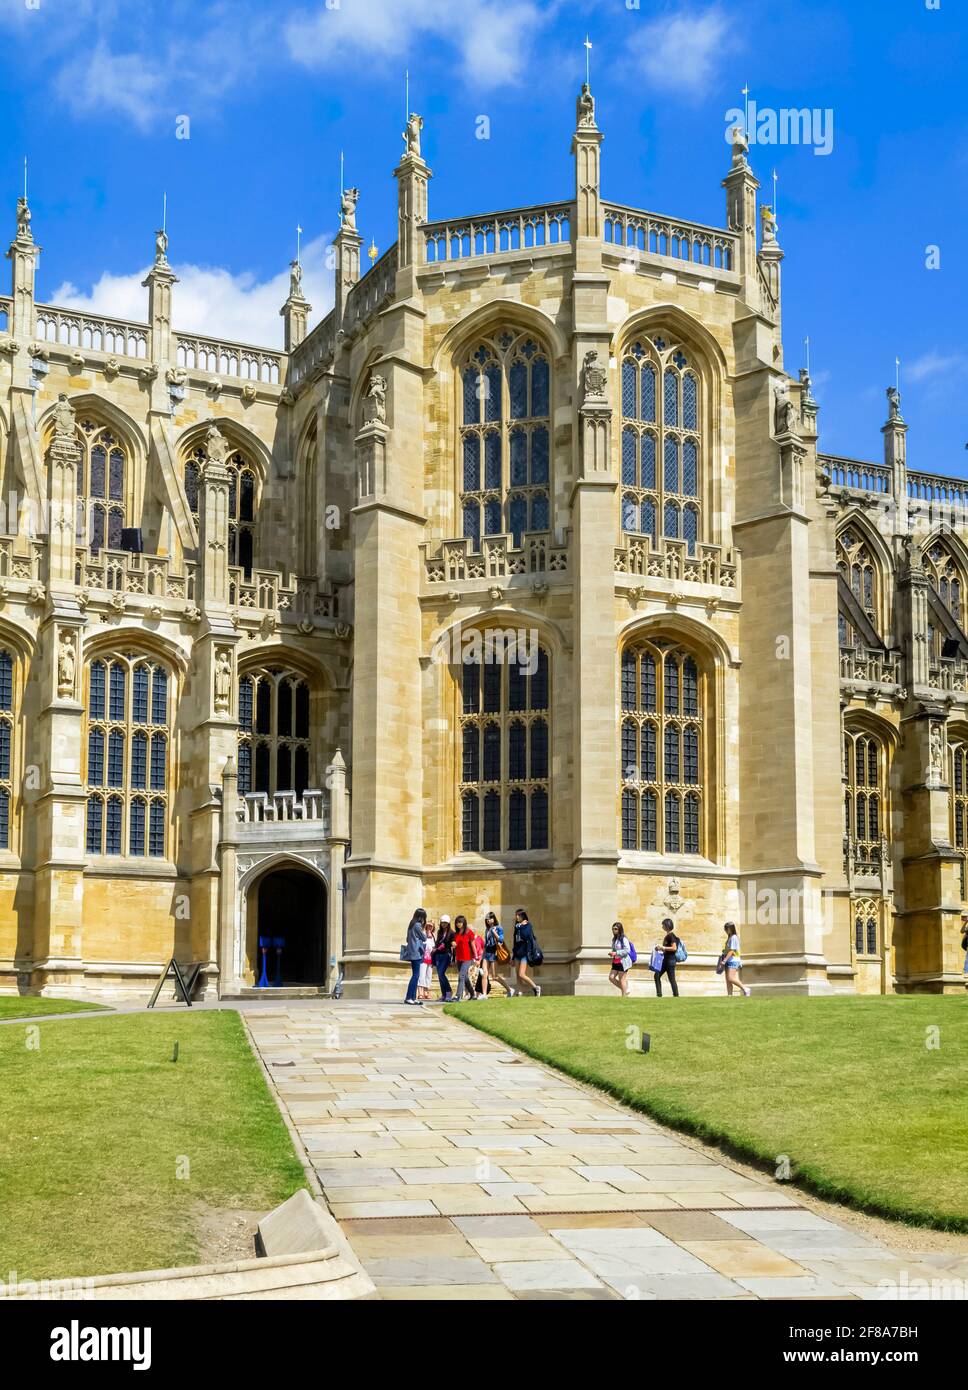 Exterior of the iconic Perpendicular Gothic architecture St George's Chapel in the Lower Ward of Windsor Castle, Windsor, Berkshire, UK Stock Photo